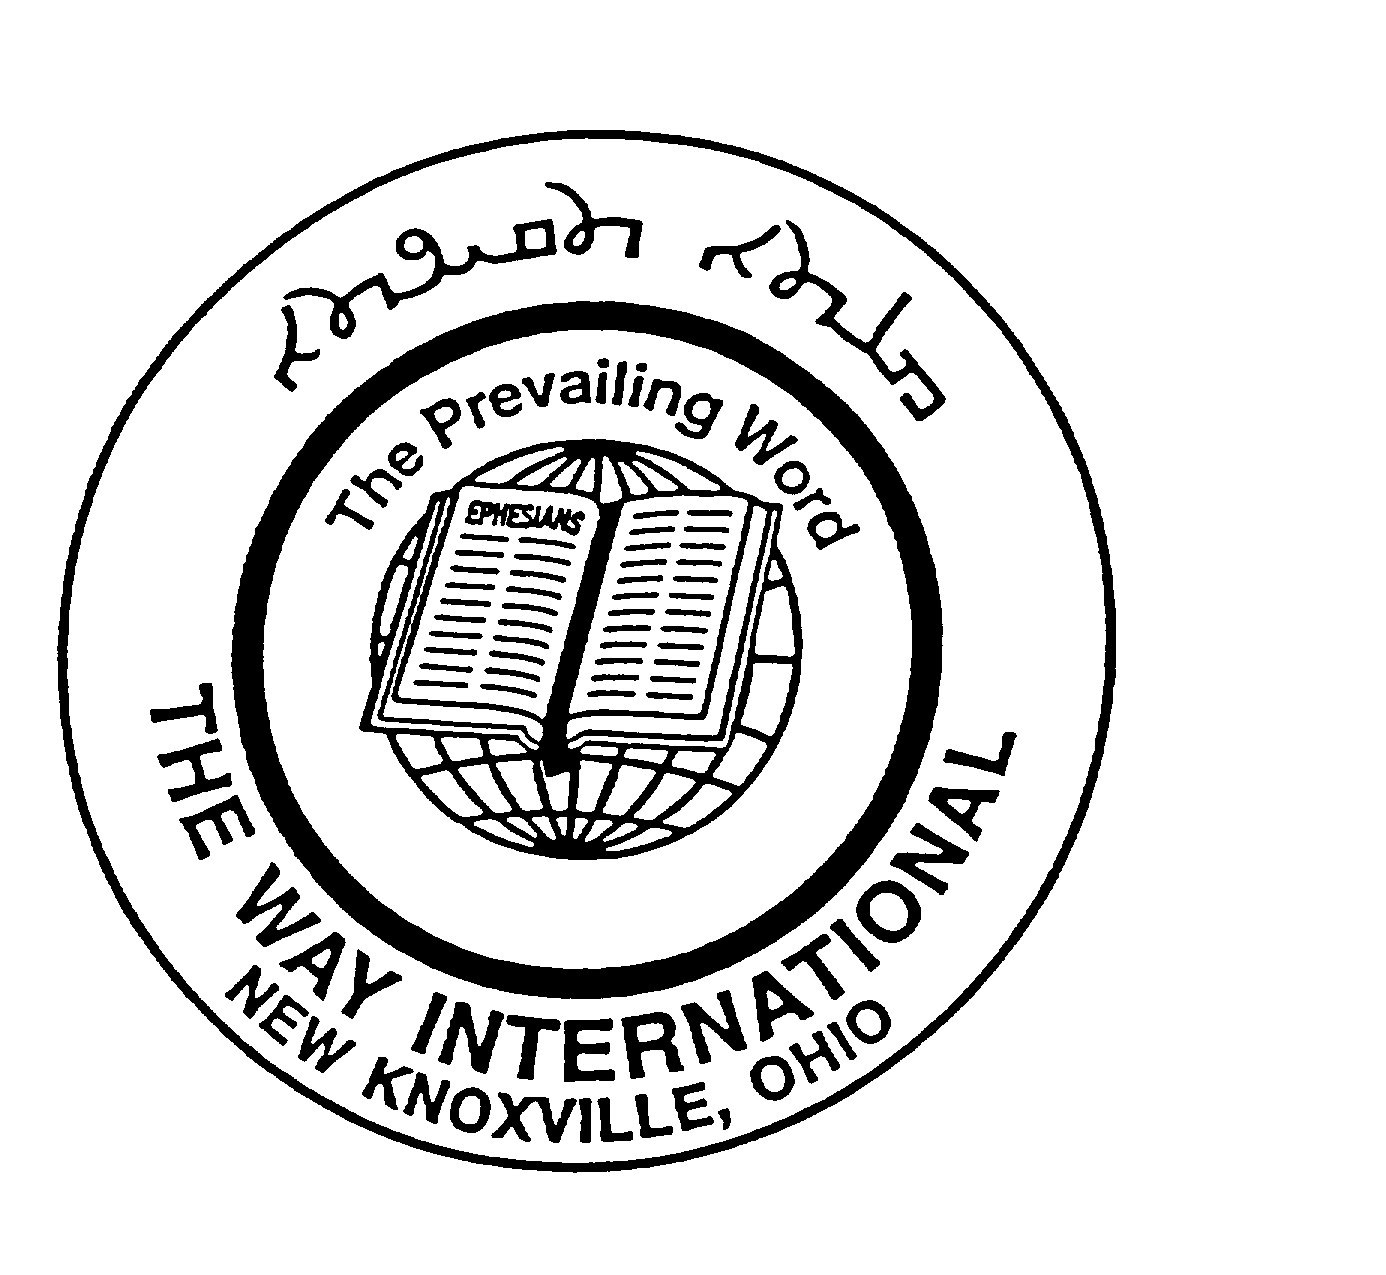 Trademark Logo THE PREVAILING WORD THE WAY INTERNATIONAL NEW KNOXVILLE, OHIO EPHESIANS